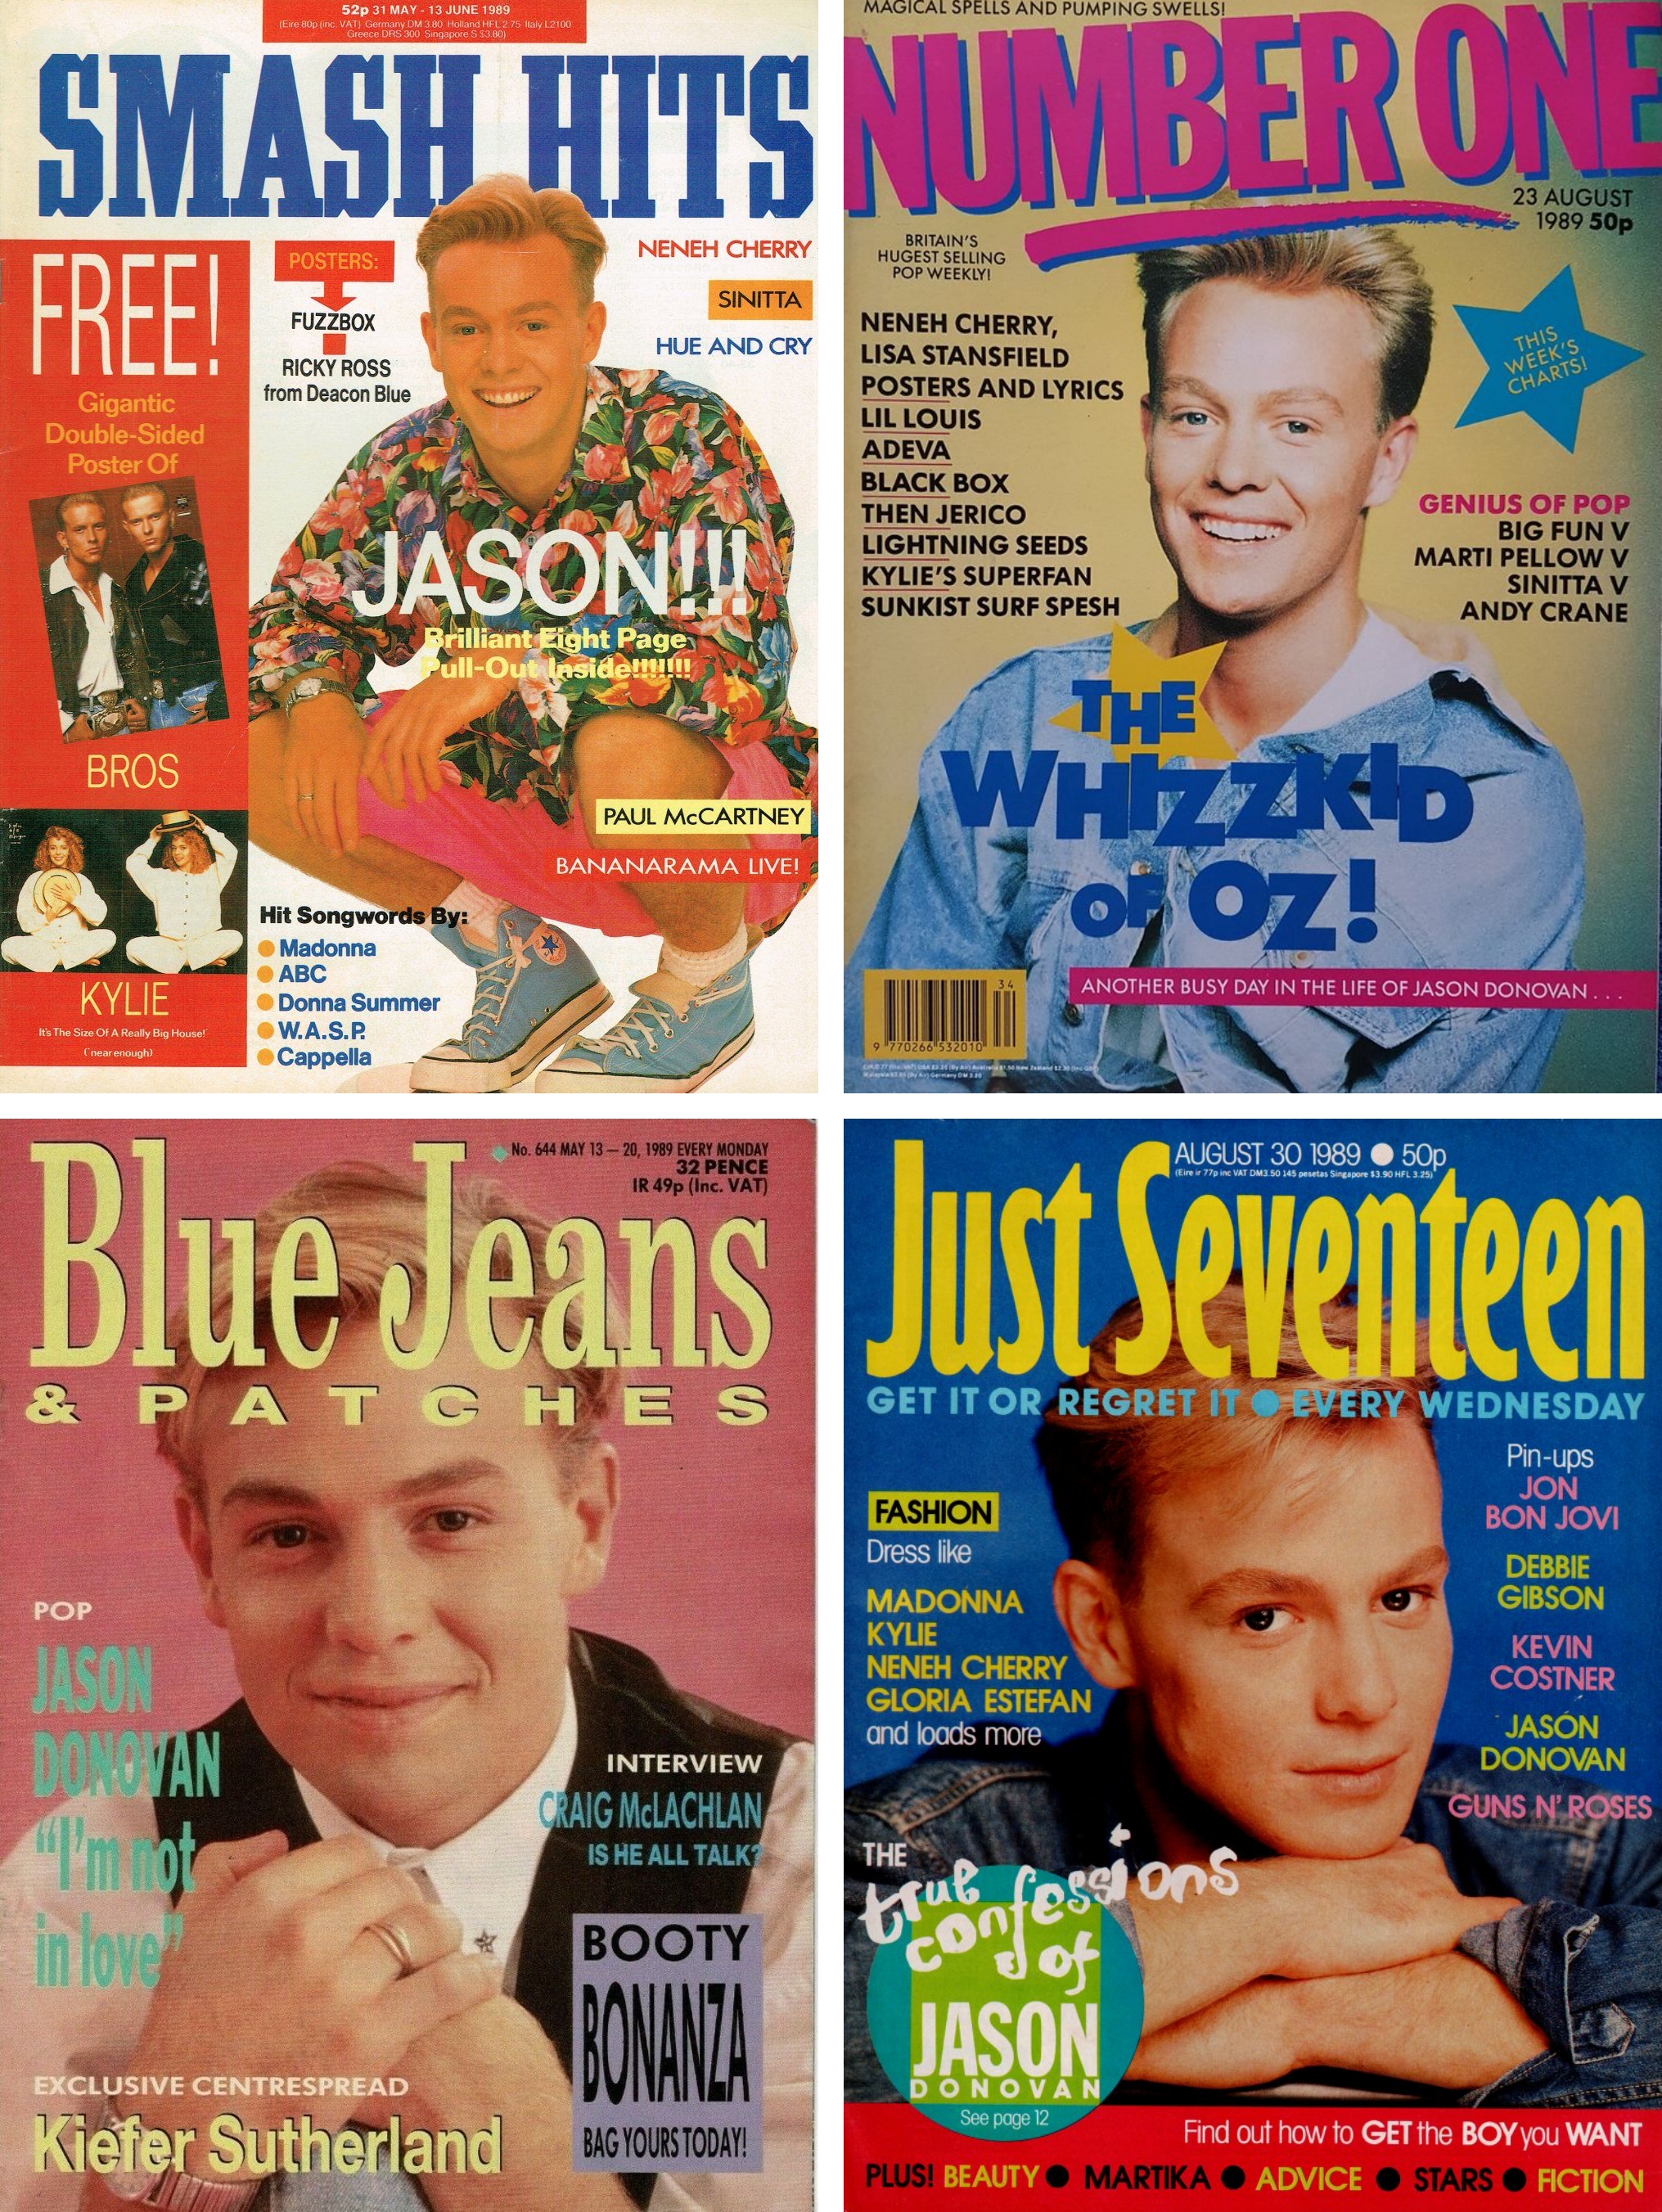 Jason Donovan on the covers of four popular British youth-oriented magazines